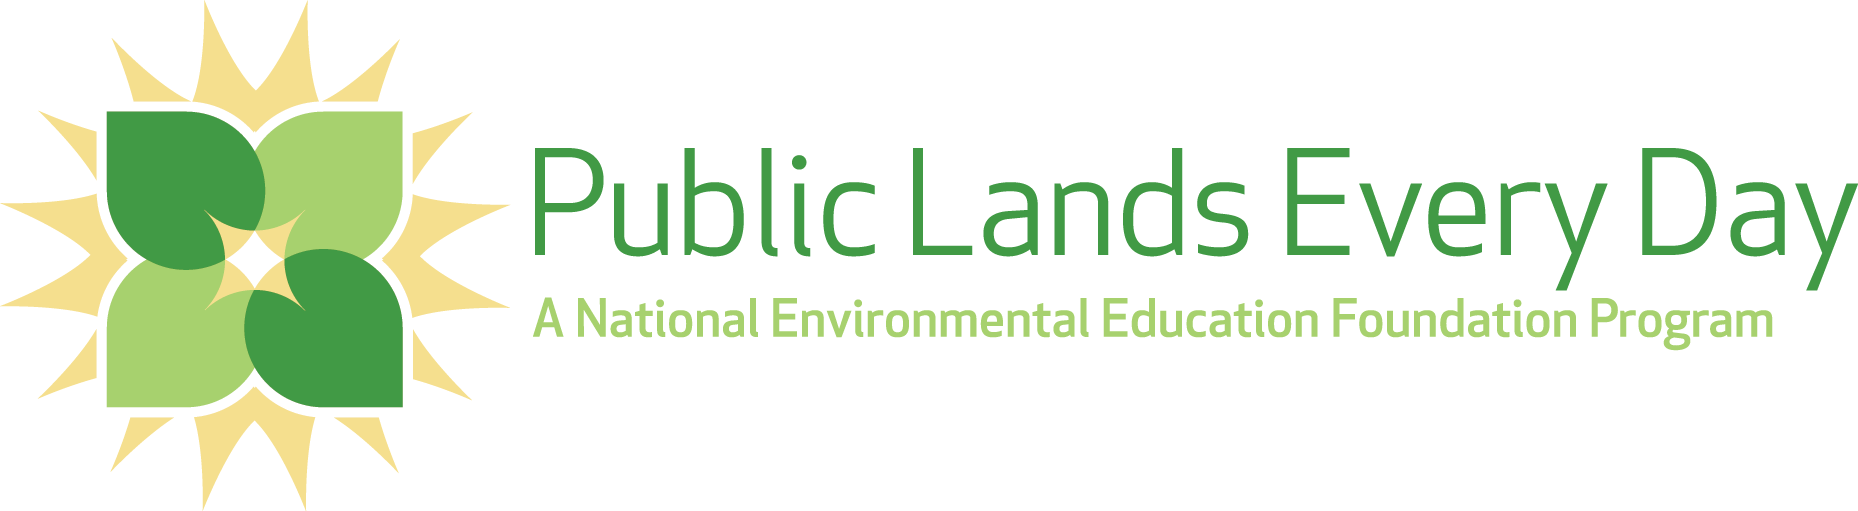 1Public-Lands-Every-Day-logo_300dpi_png